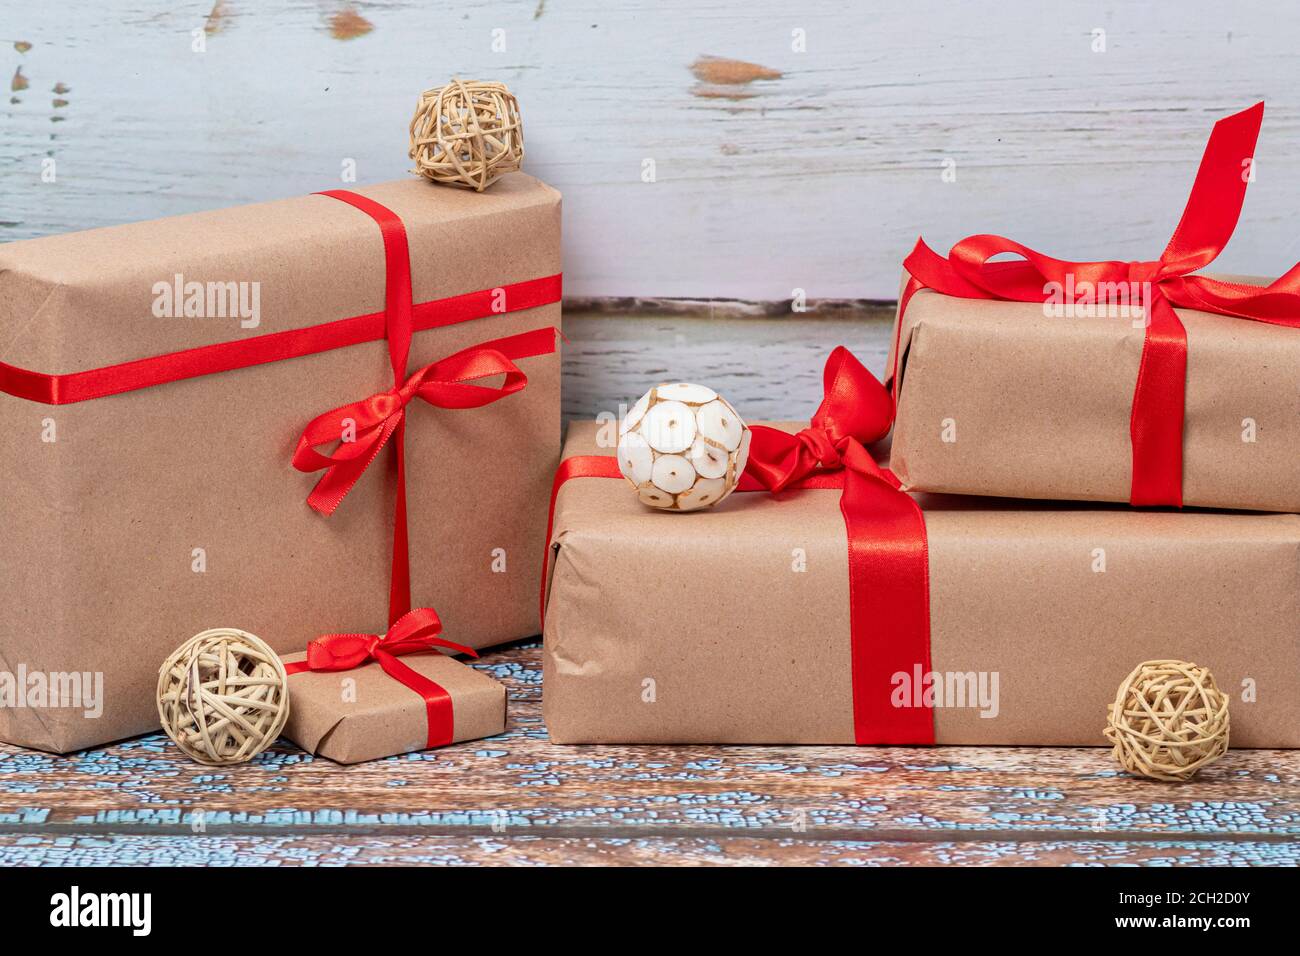 Christmas gifts and lights on wooden floor Stock Photo